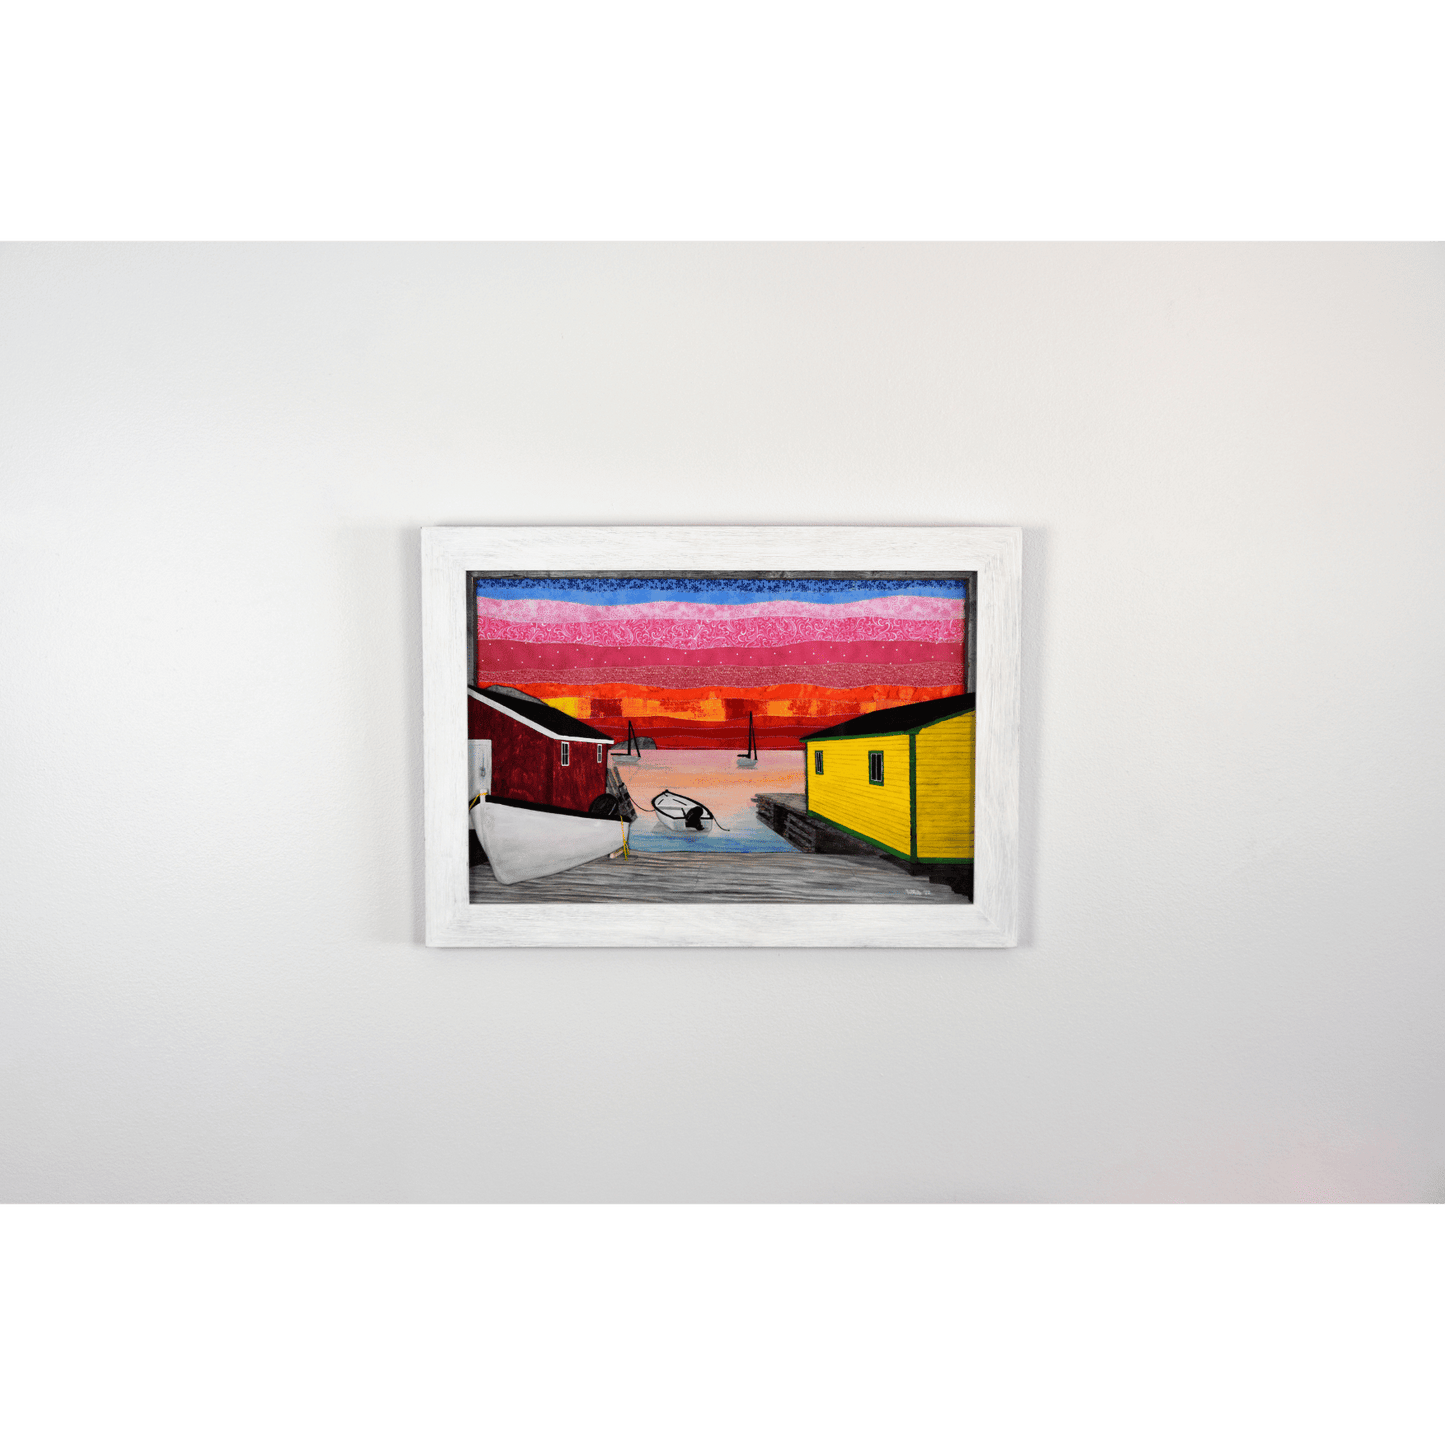 "Back Harbour Sunset" is a reproduction print showcasing a picturesque view of Twillingate's sunset with fishing boats and a colourful sky.